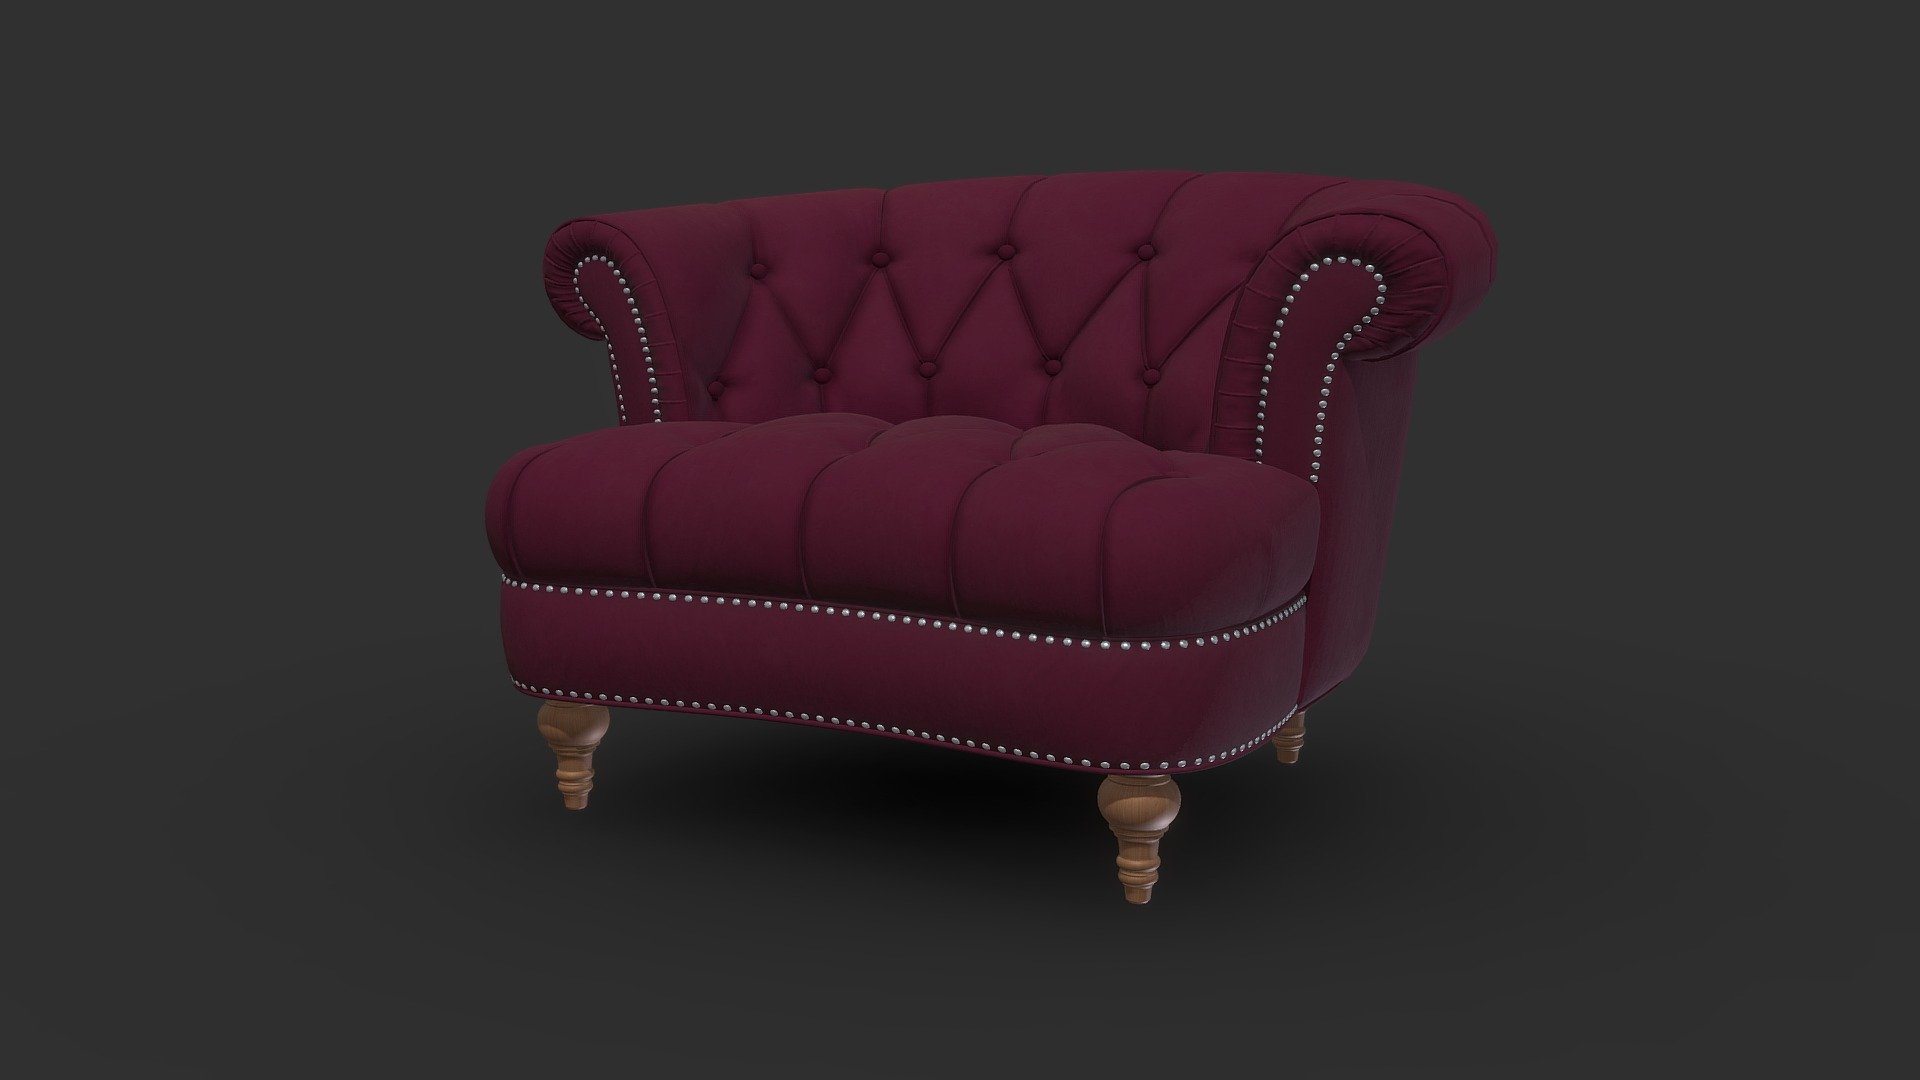 La RosaTufted Accent Armchair from Jennifer Taylor Home Collection

Dimensions: 

W 1170 x D 1015 x H 700

Seat height: 445 mm

Tags: contemporary, modern, burgundy, velvet, chesterfiled, classic, american, nailhead, wayfair, mowry - La Rosa Tufted Accent Chair - Buy Royalty Free 3D model by RC3D (@rc.3d) 3d model